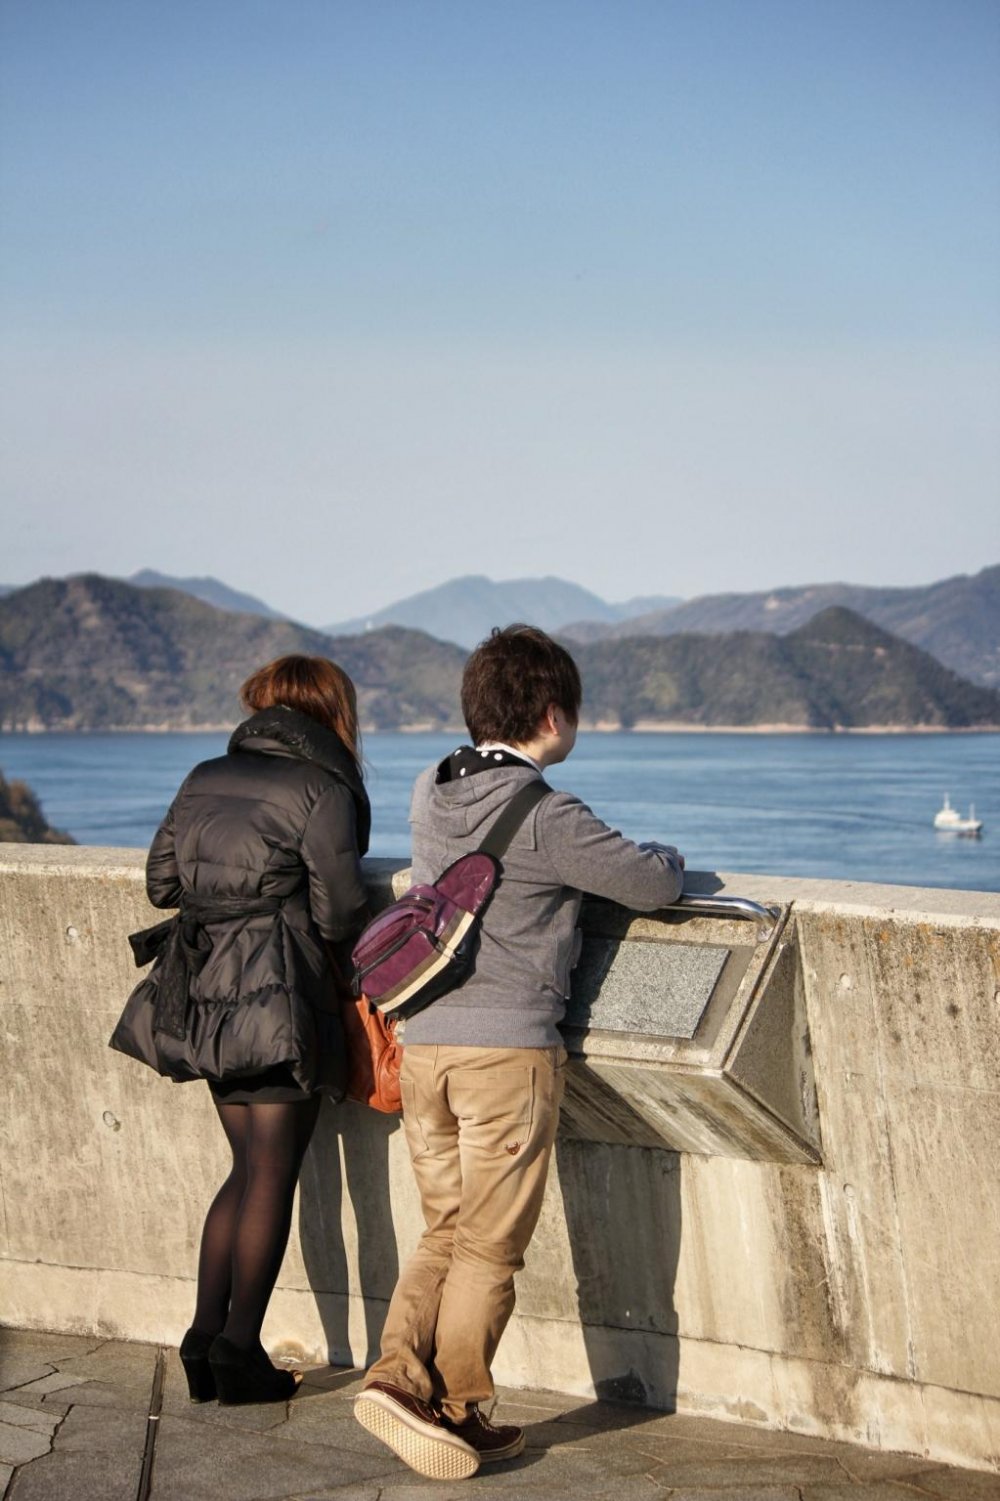 Itoyama Park in Imabari is popular with young couples who enjoy the romance of the expansive views